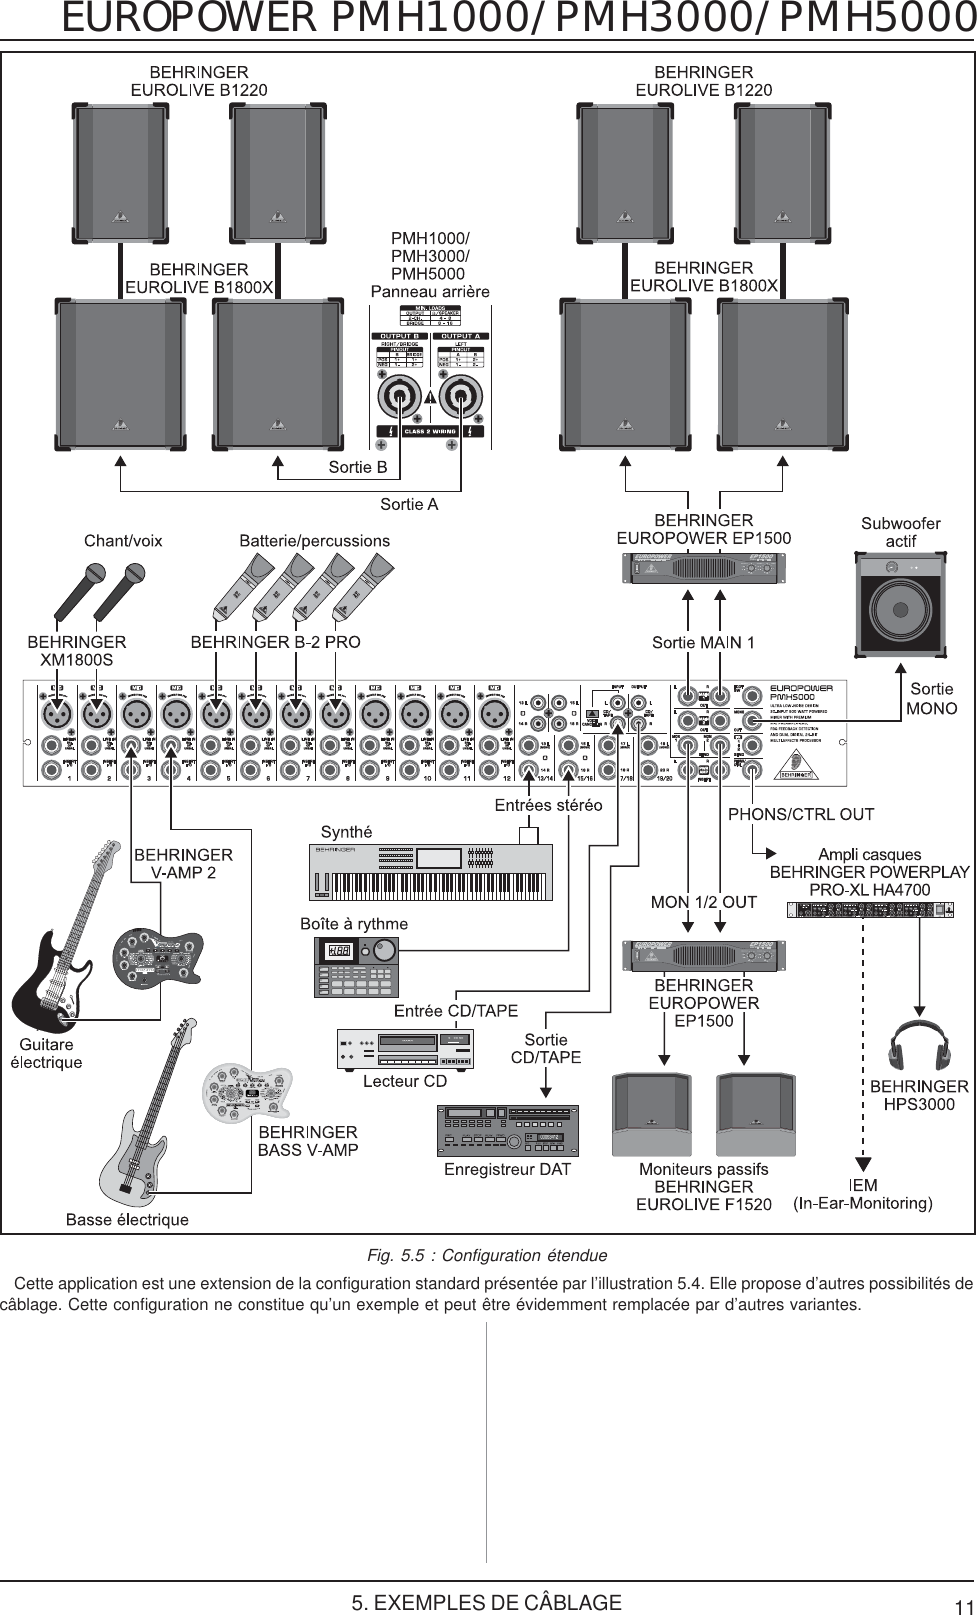 Page 11 of 12 - Behringer PMH1000 User Manual (French) P0115 M FR